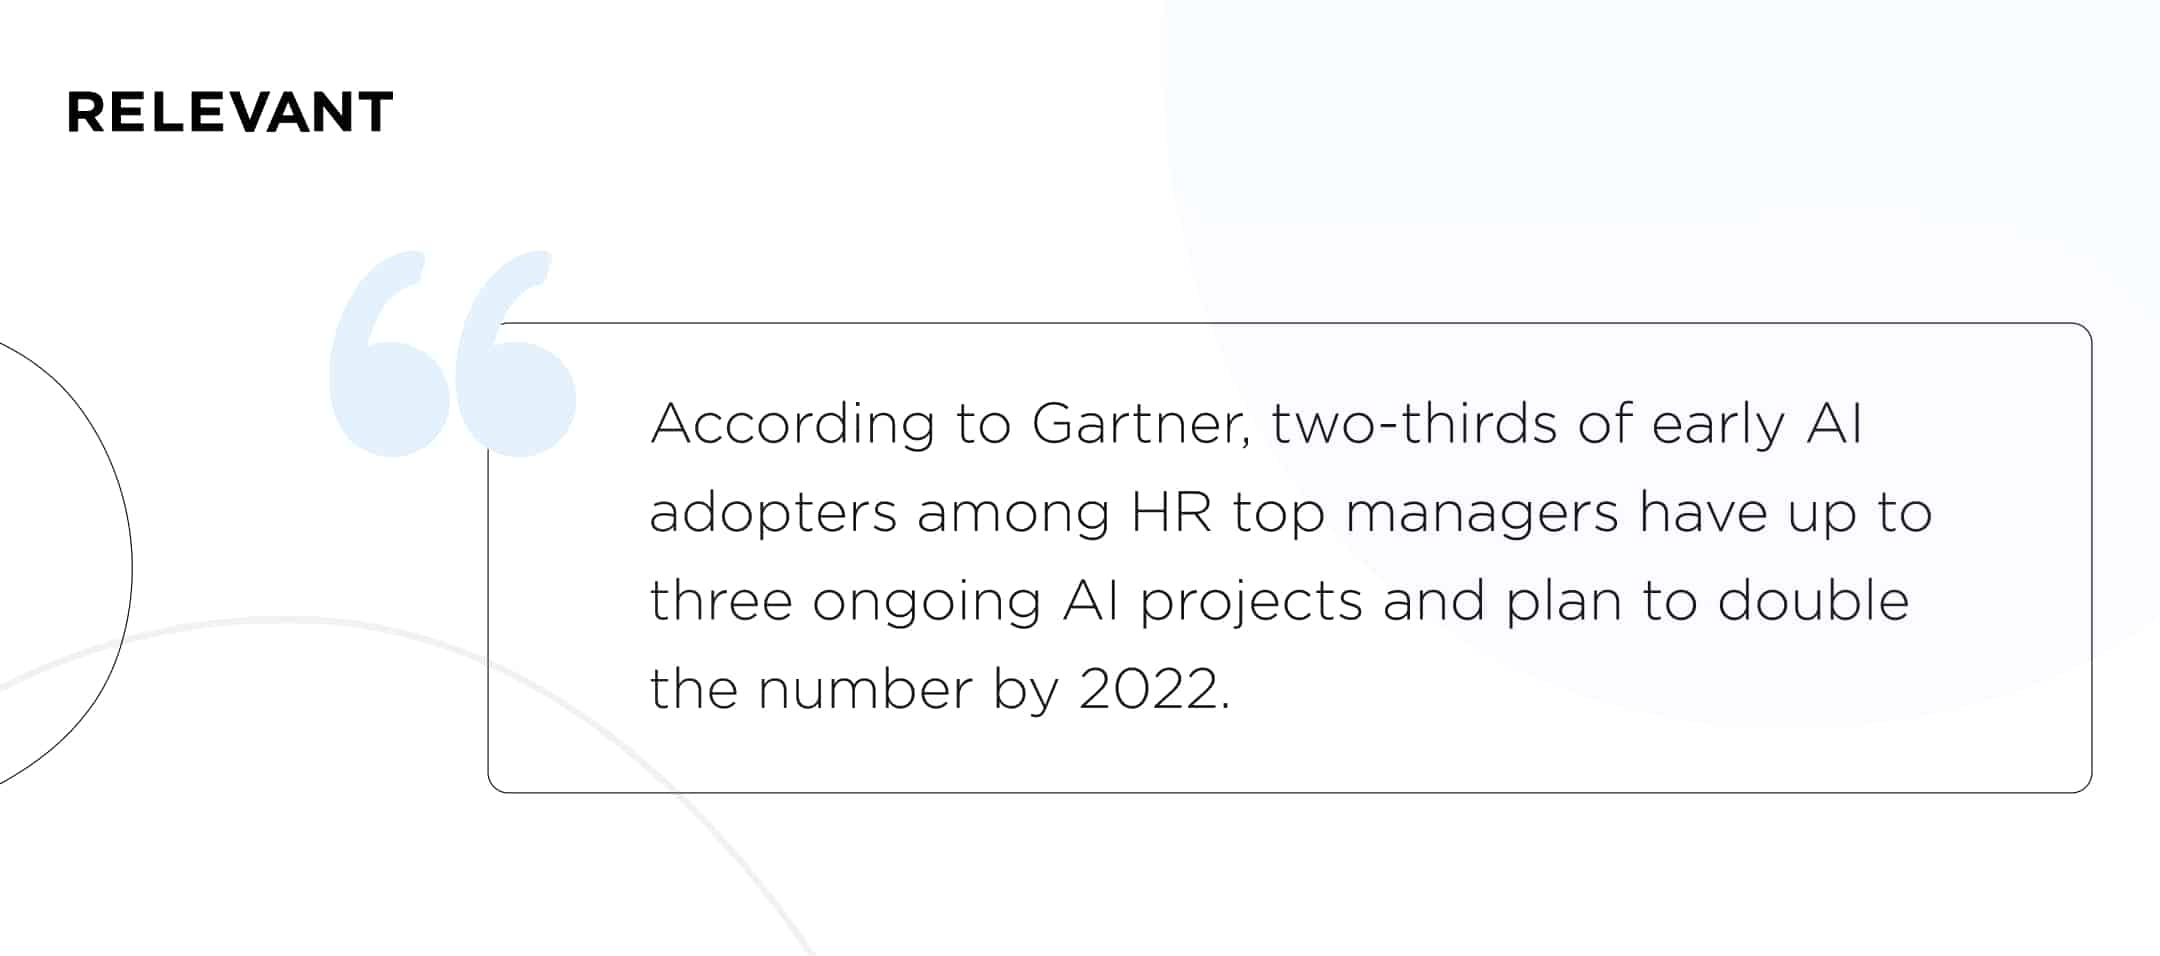 HR transformation in Fintech with AI is going to double by 2022